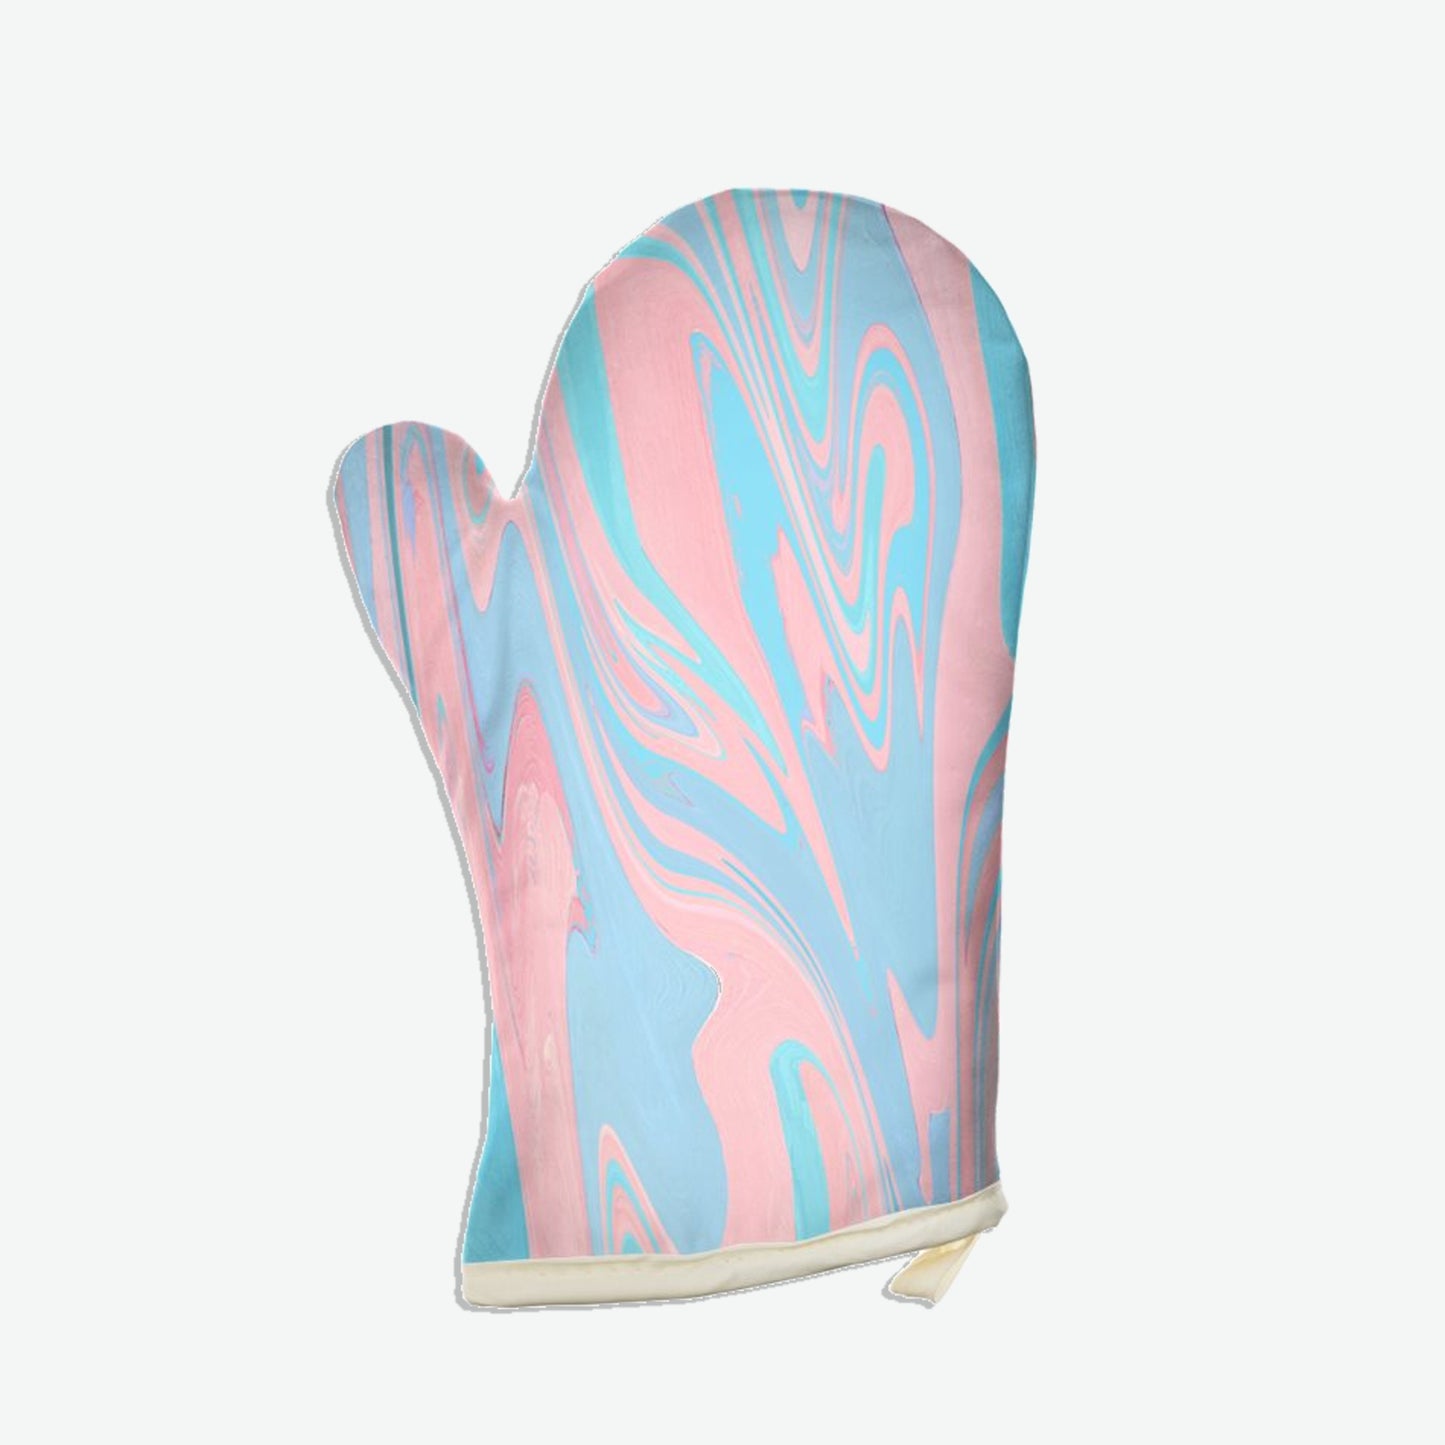 Trippy Stripe Suedette Oven Glove in Blue and Pink